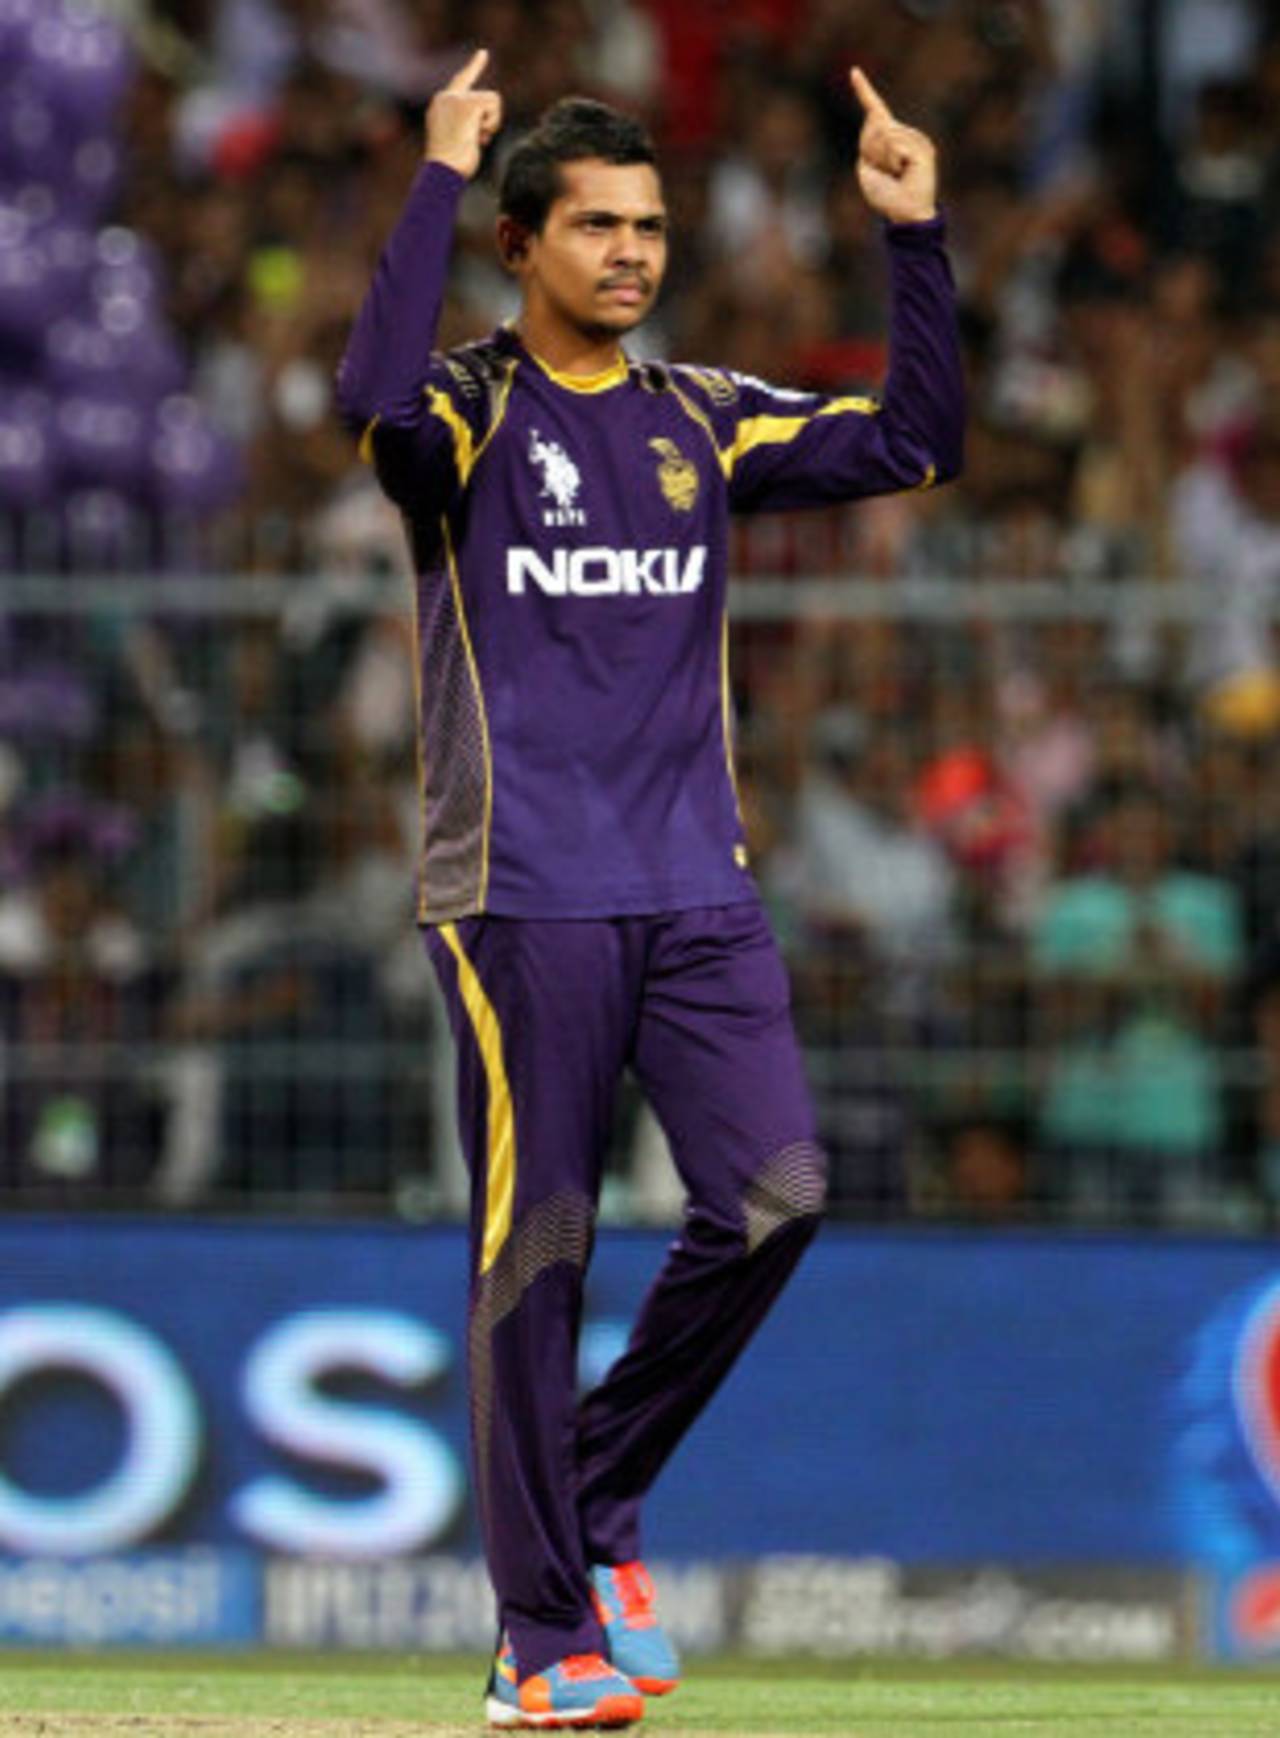 Sunil Narine has been picked in the Kolkata Knight Riders squad. KKR play their first CLT20 game on September 17, which is also the fifth day of the second Test between West Indies and Bangladesh&nbsp;&nbsp;&bull;&nbsp;&nbsp;BCCI